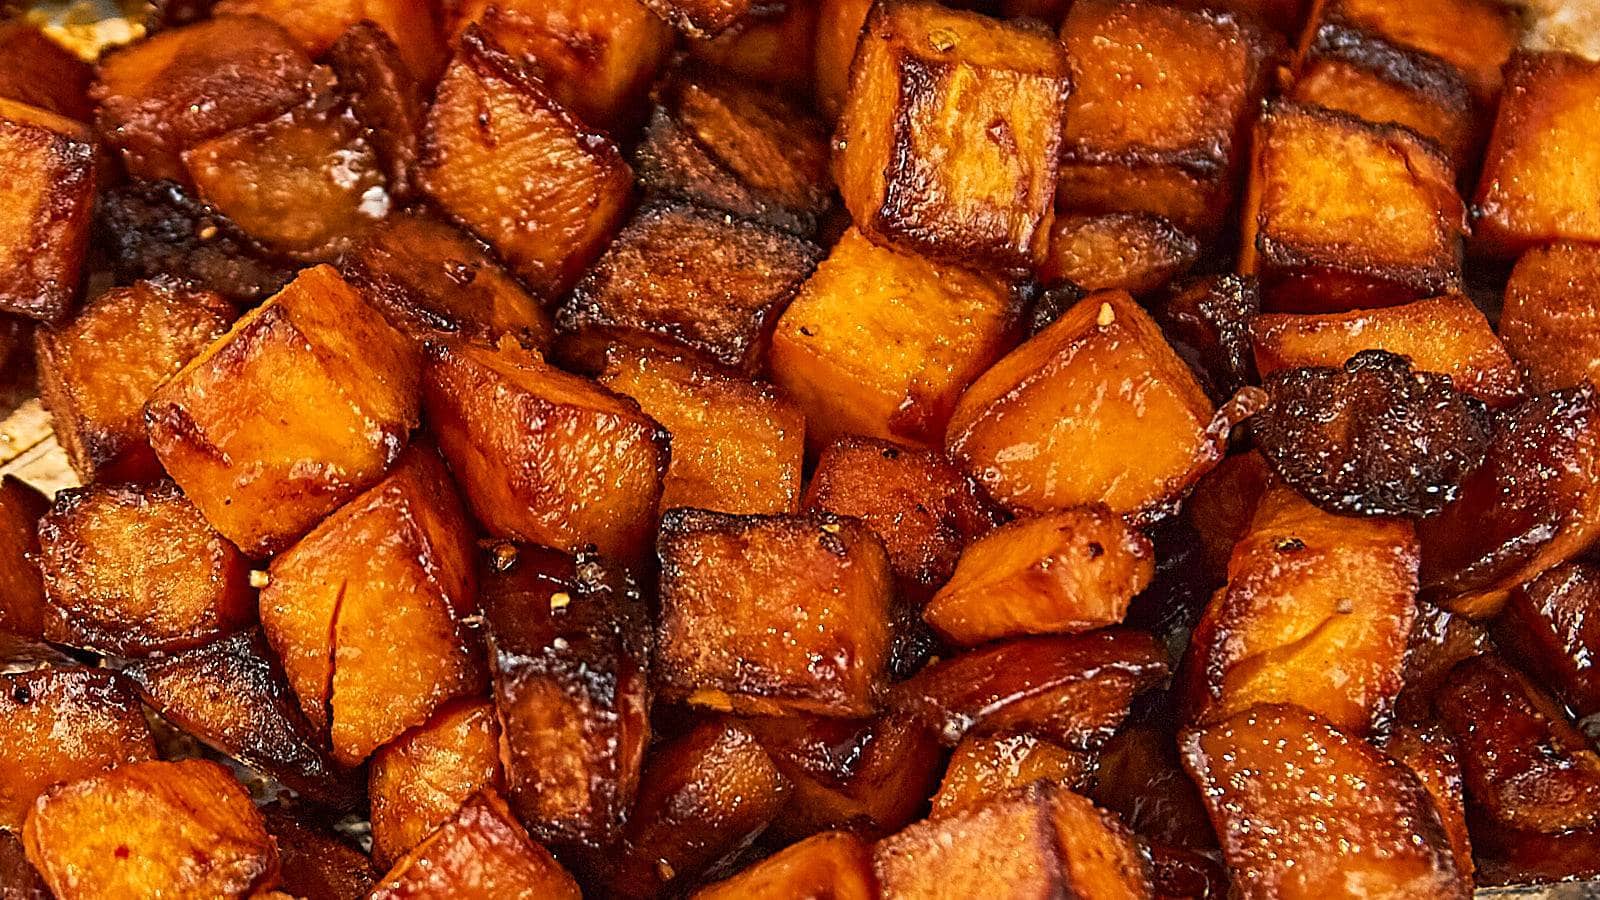 Honey Roasted Sweet Potato recipe by Cheerful Cook.